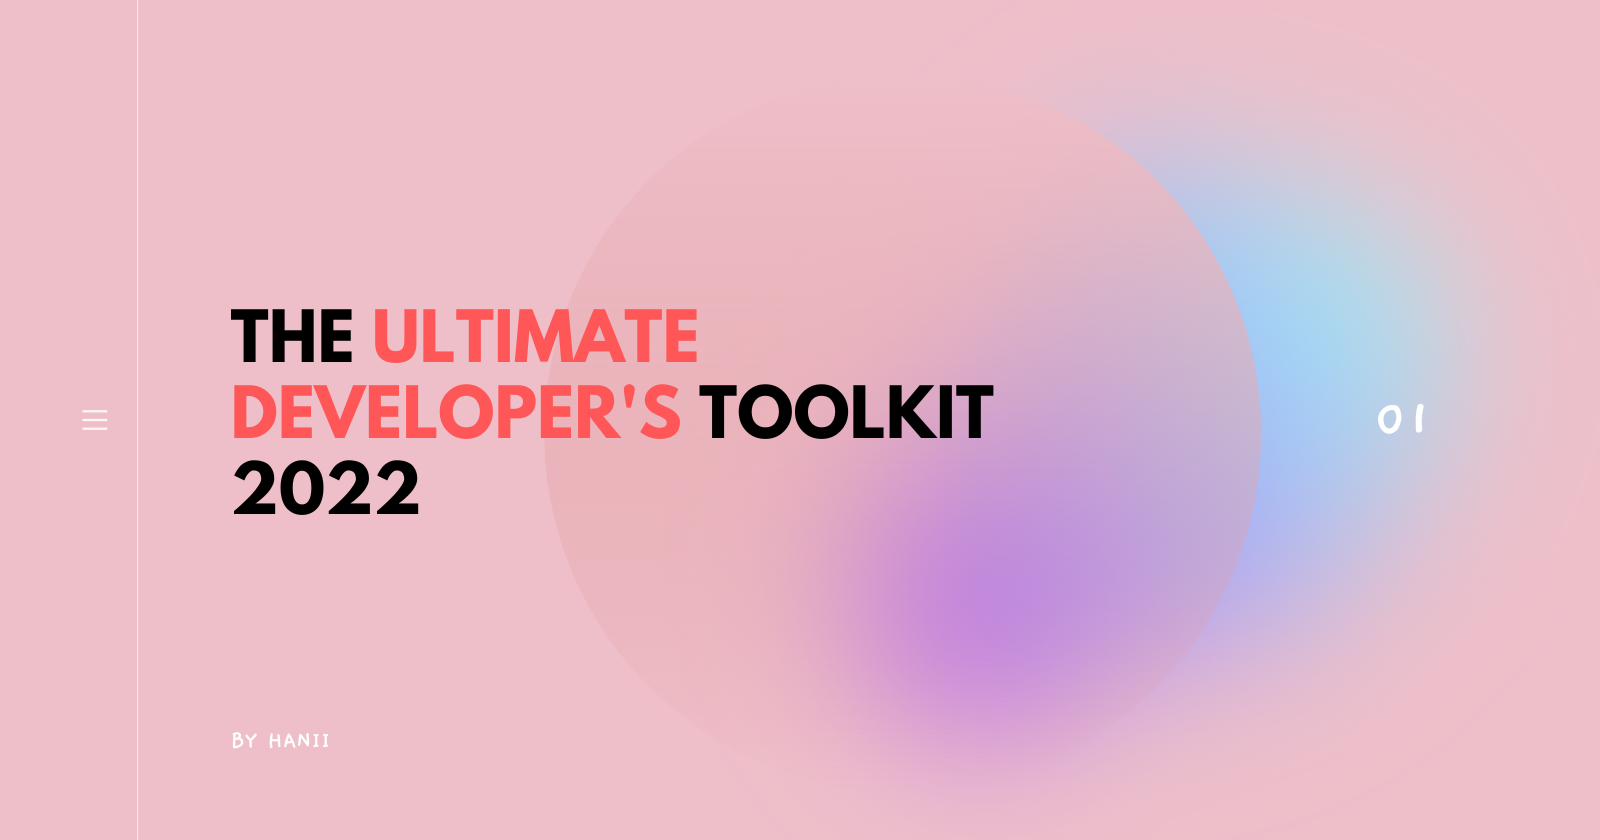 The Ultimate Developer's Toolkit 2022